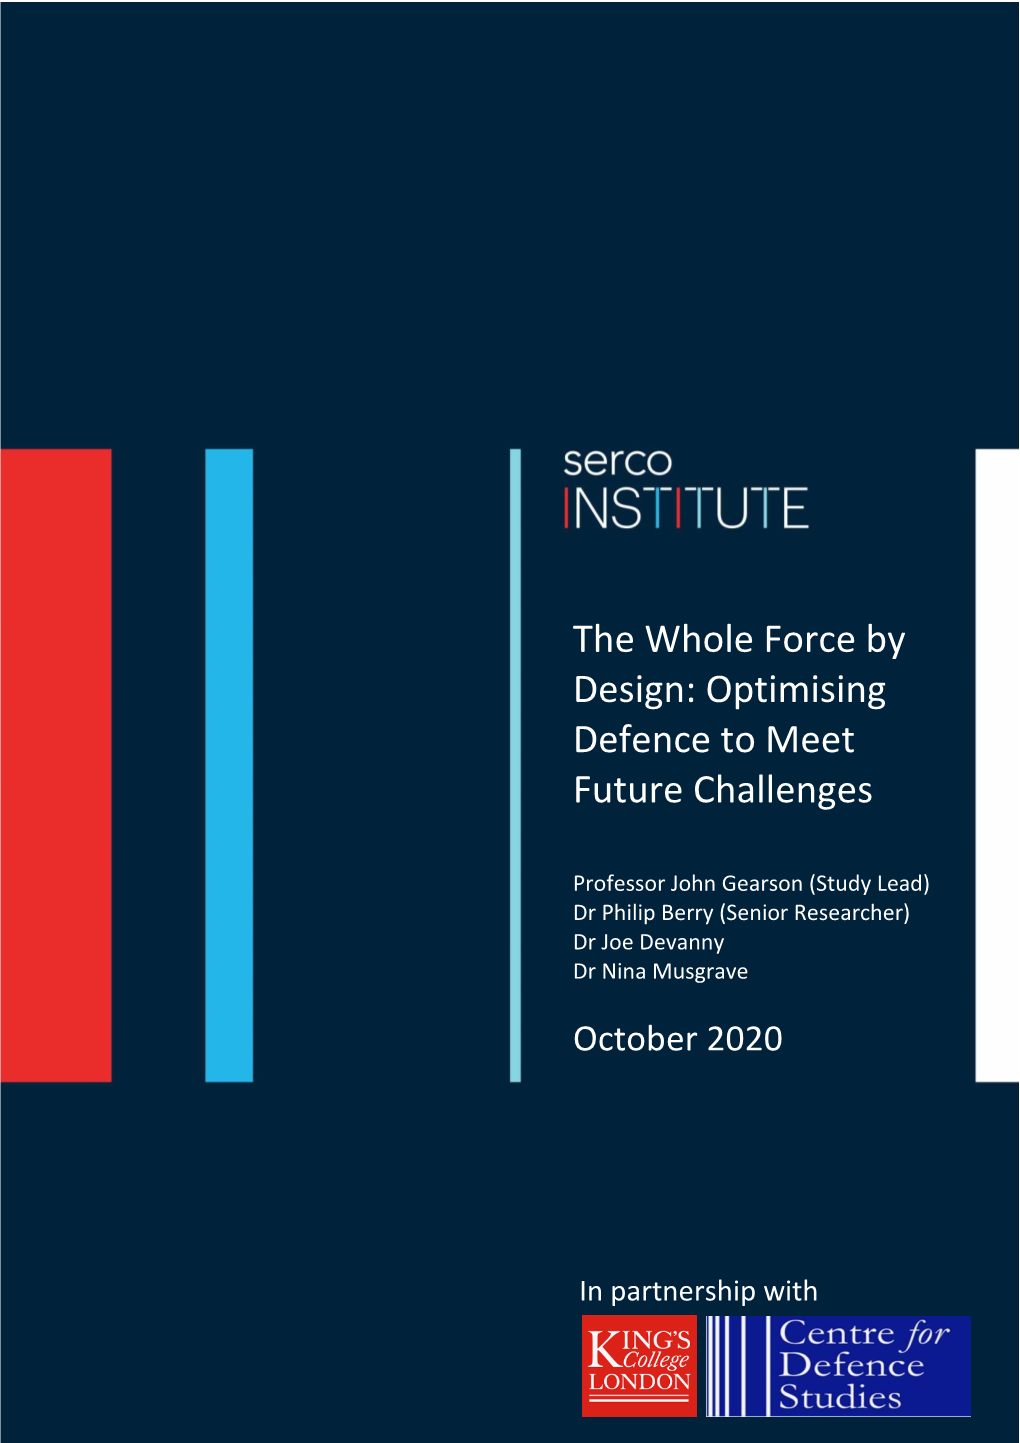 The Whole Force by Design: Optimising Defence to Meet Future Challenges